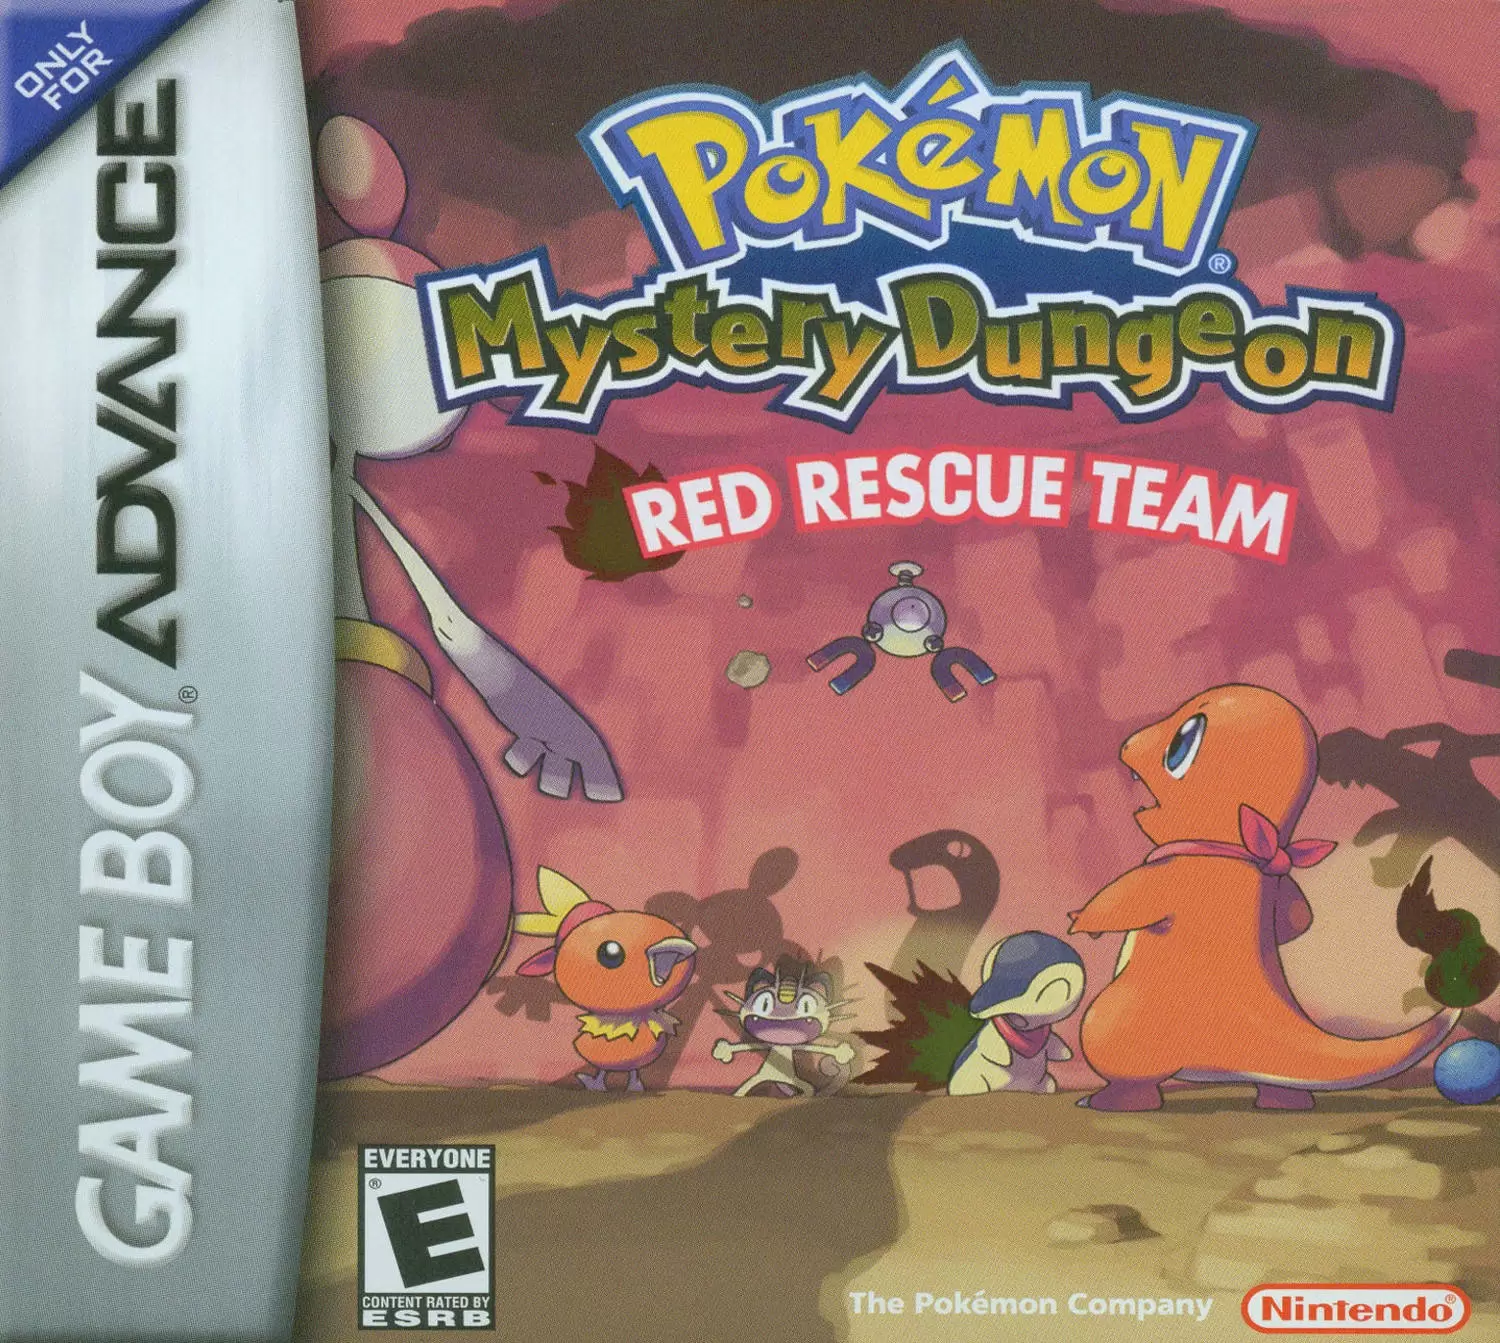 Game Boy Advance Games - Pokémon Mystery Dungeon: Red Rescue Team